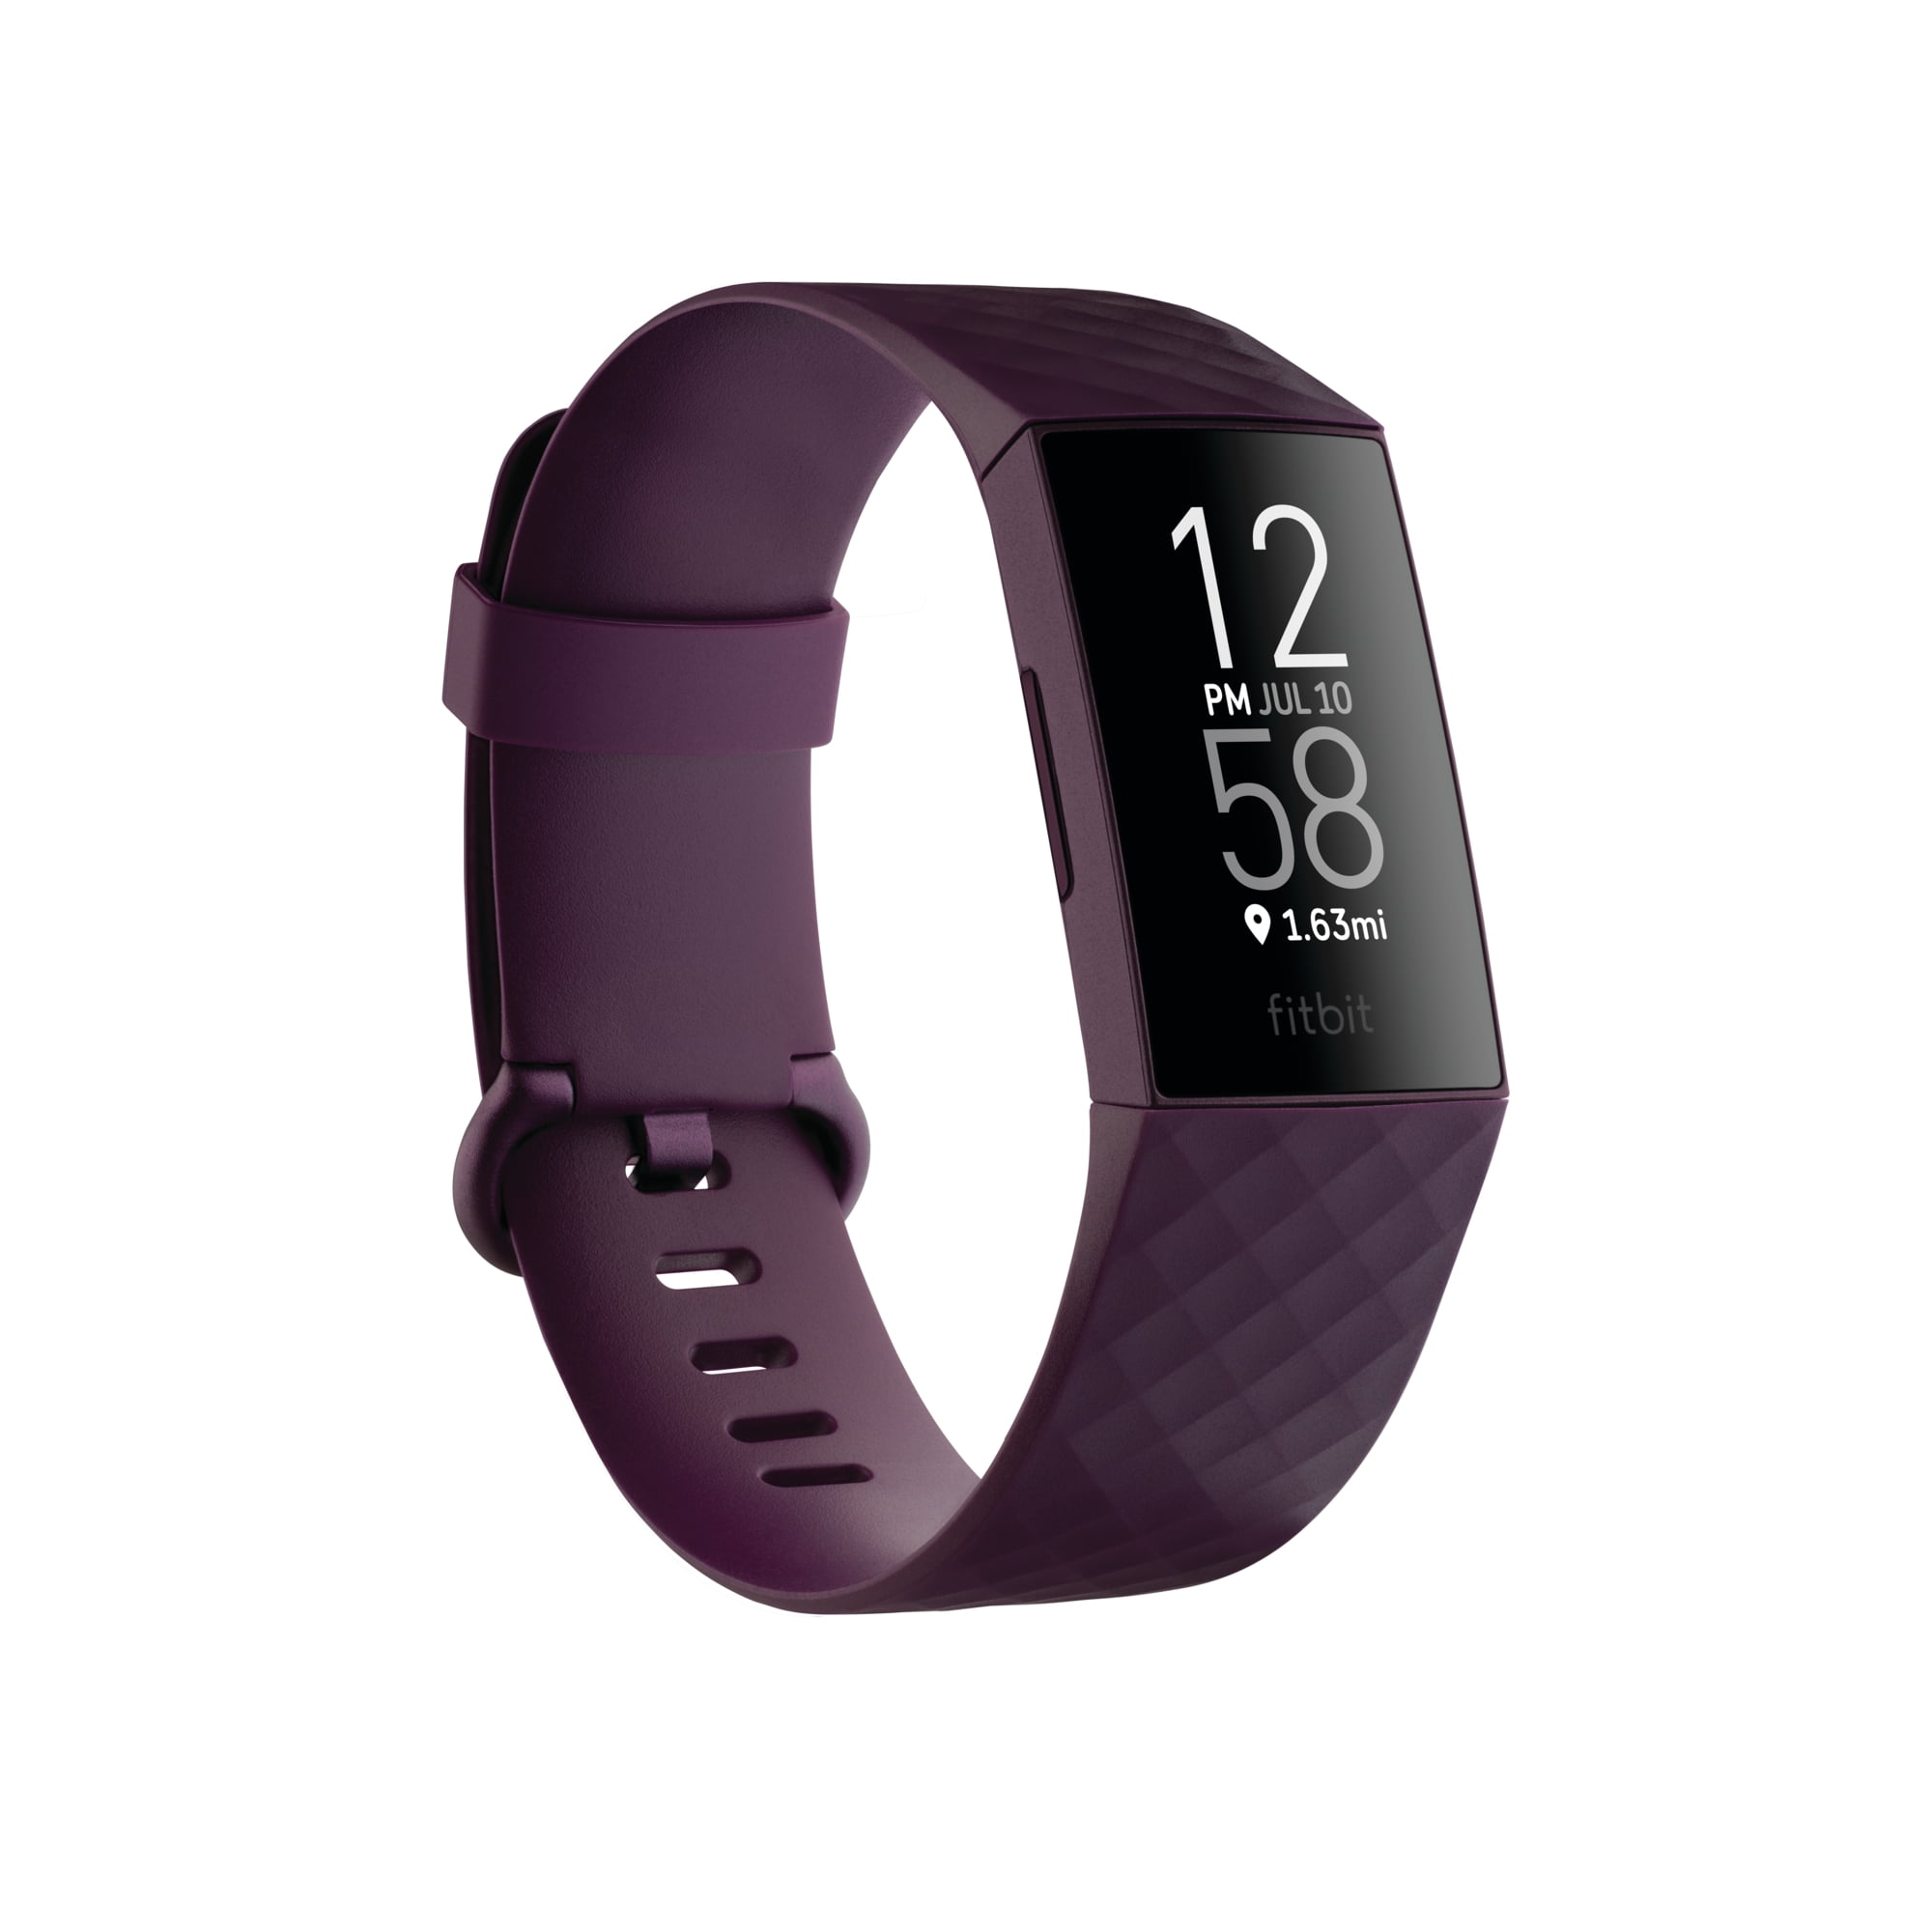 Fitbit Charge 4 (NFC) Activity Fitness Tracker, Black - Walmart.com